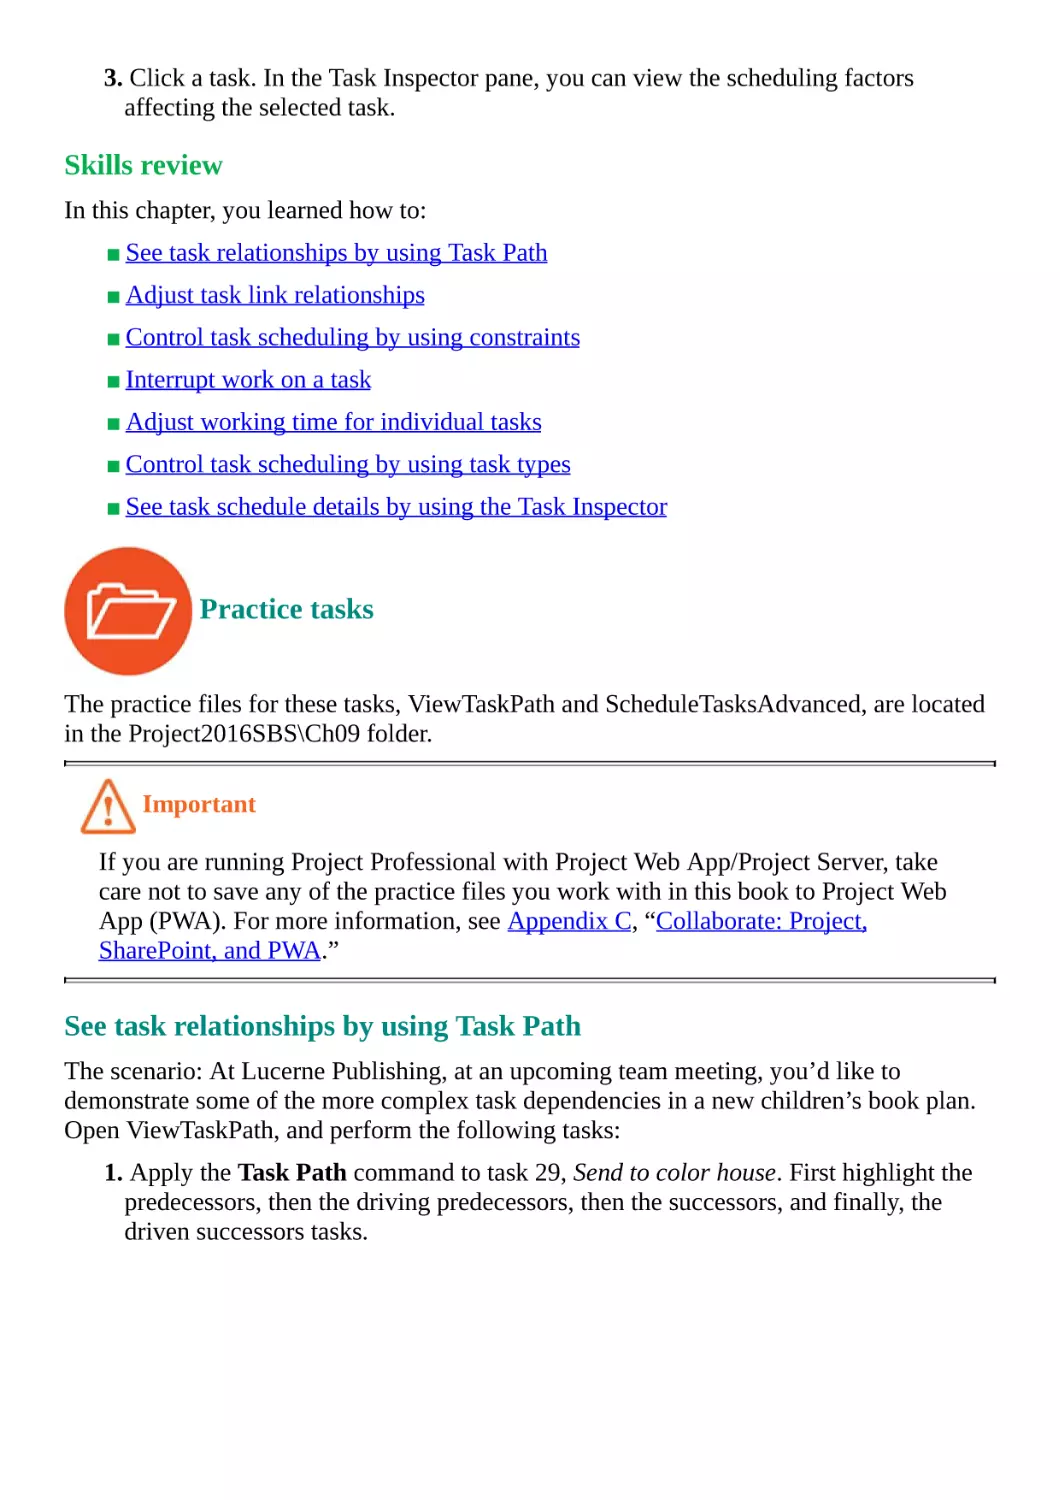 Skills review
Practice tasks
See task relationships by using Task Path